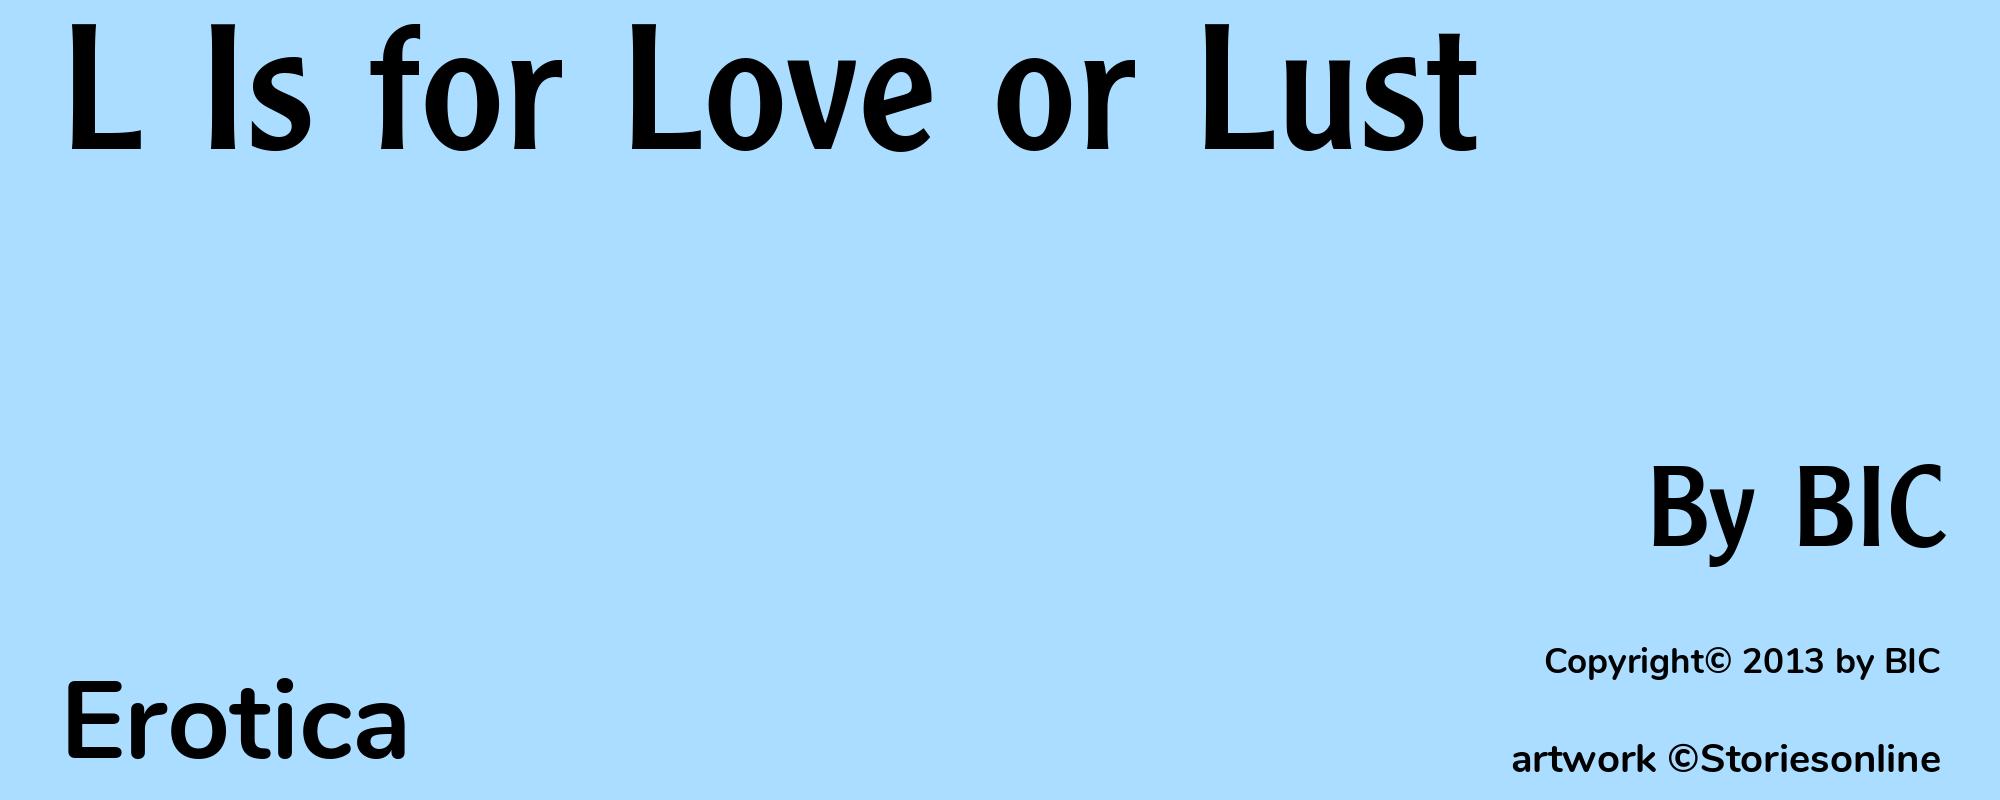 L Is for Love or Lust - Cover